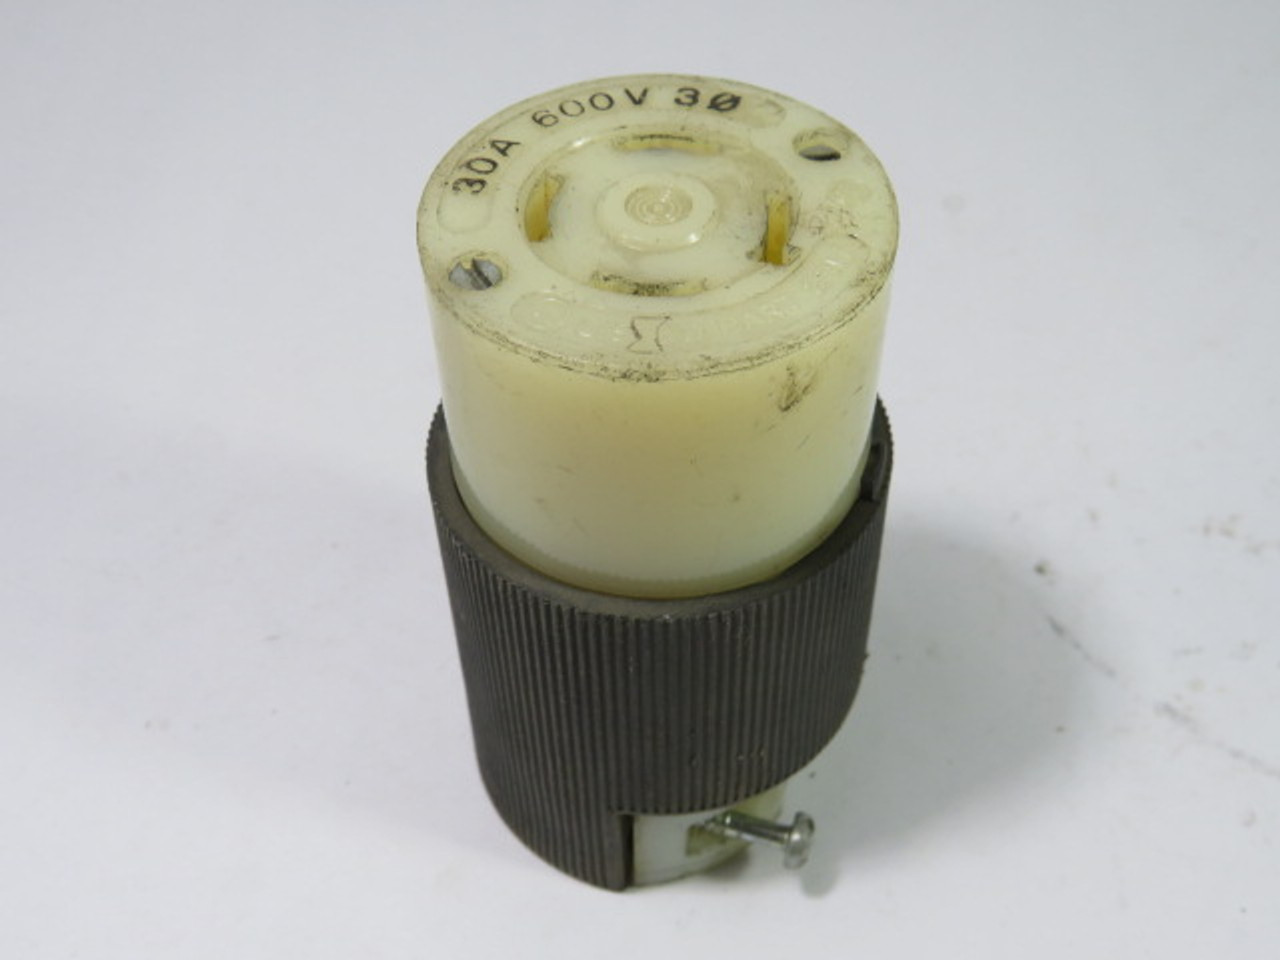 Hubbell 2743 Twist-Lock Connector 30A 600V 3P 4W USED